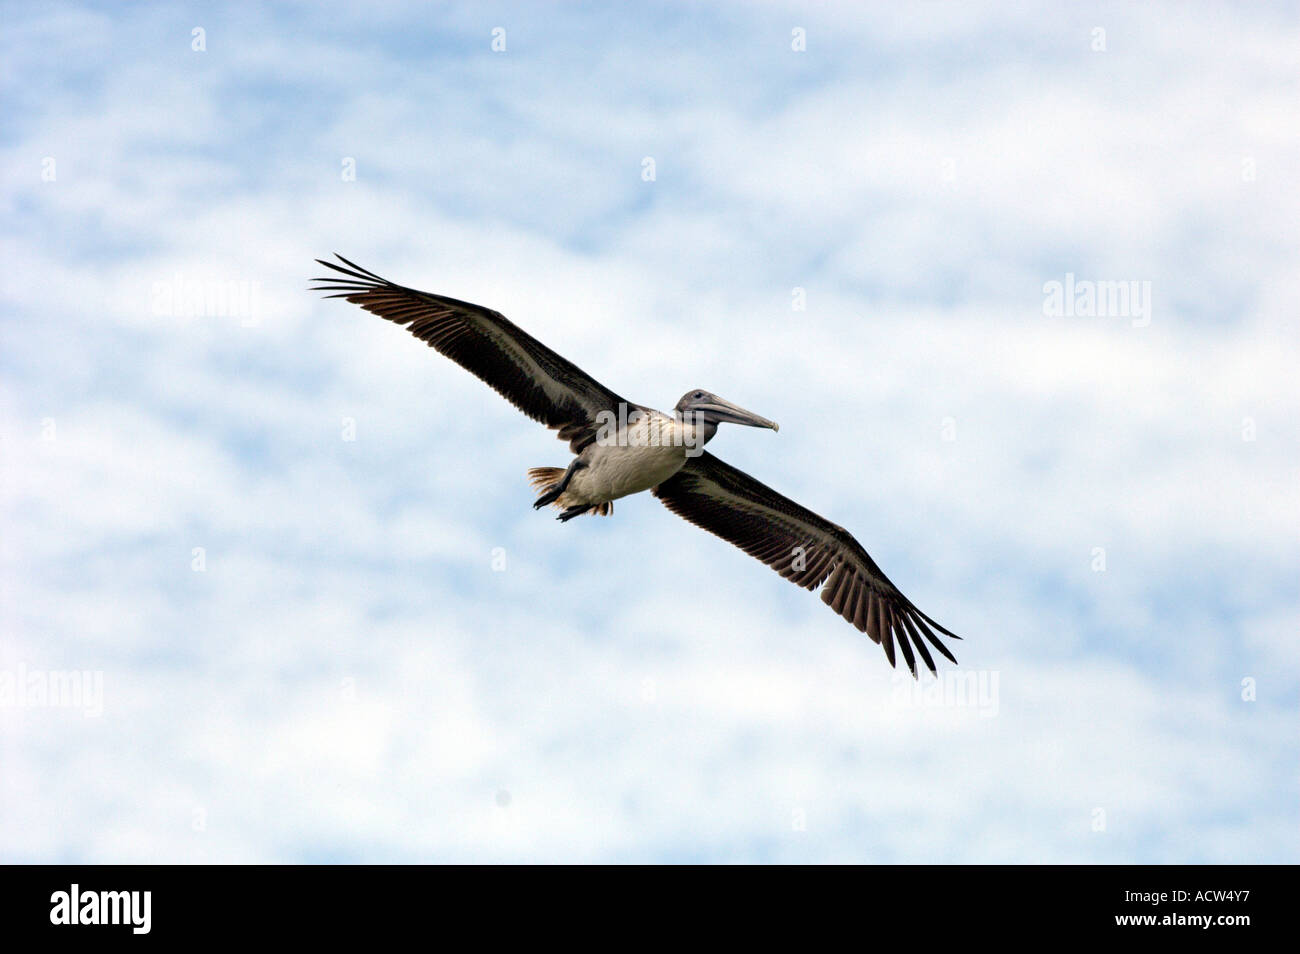 A brown pelican in flight at the Wild bird Sanctuary in the Florida Keys, USA. Stock Photo